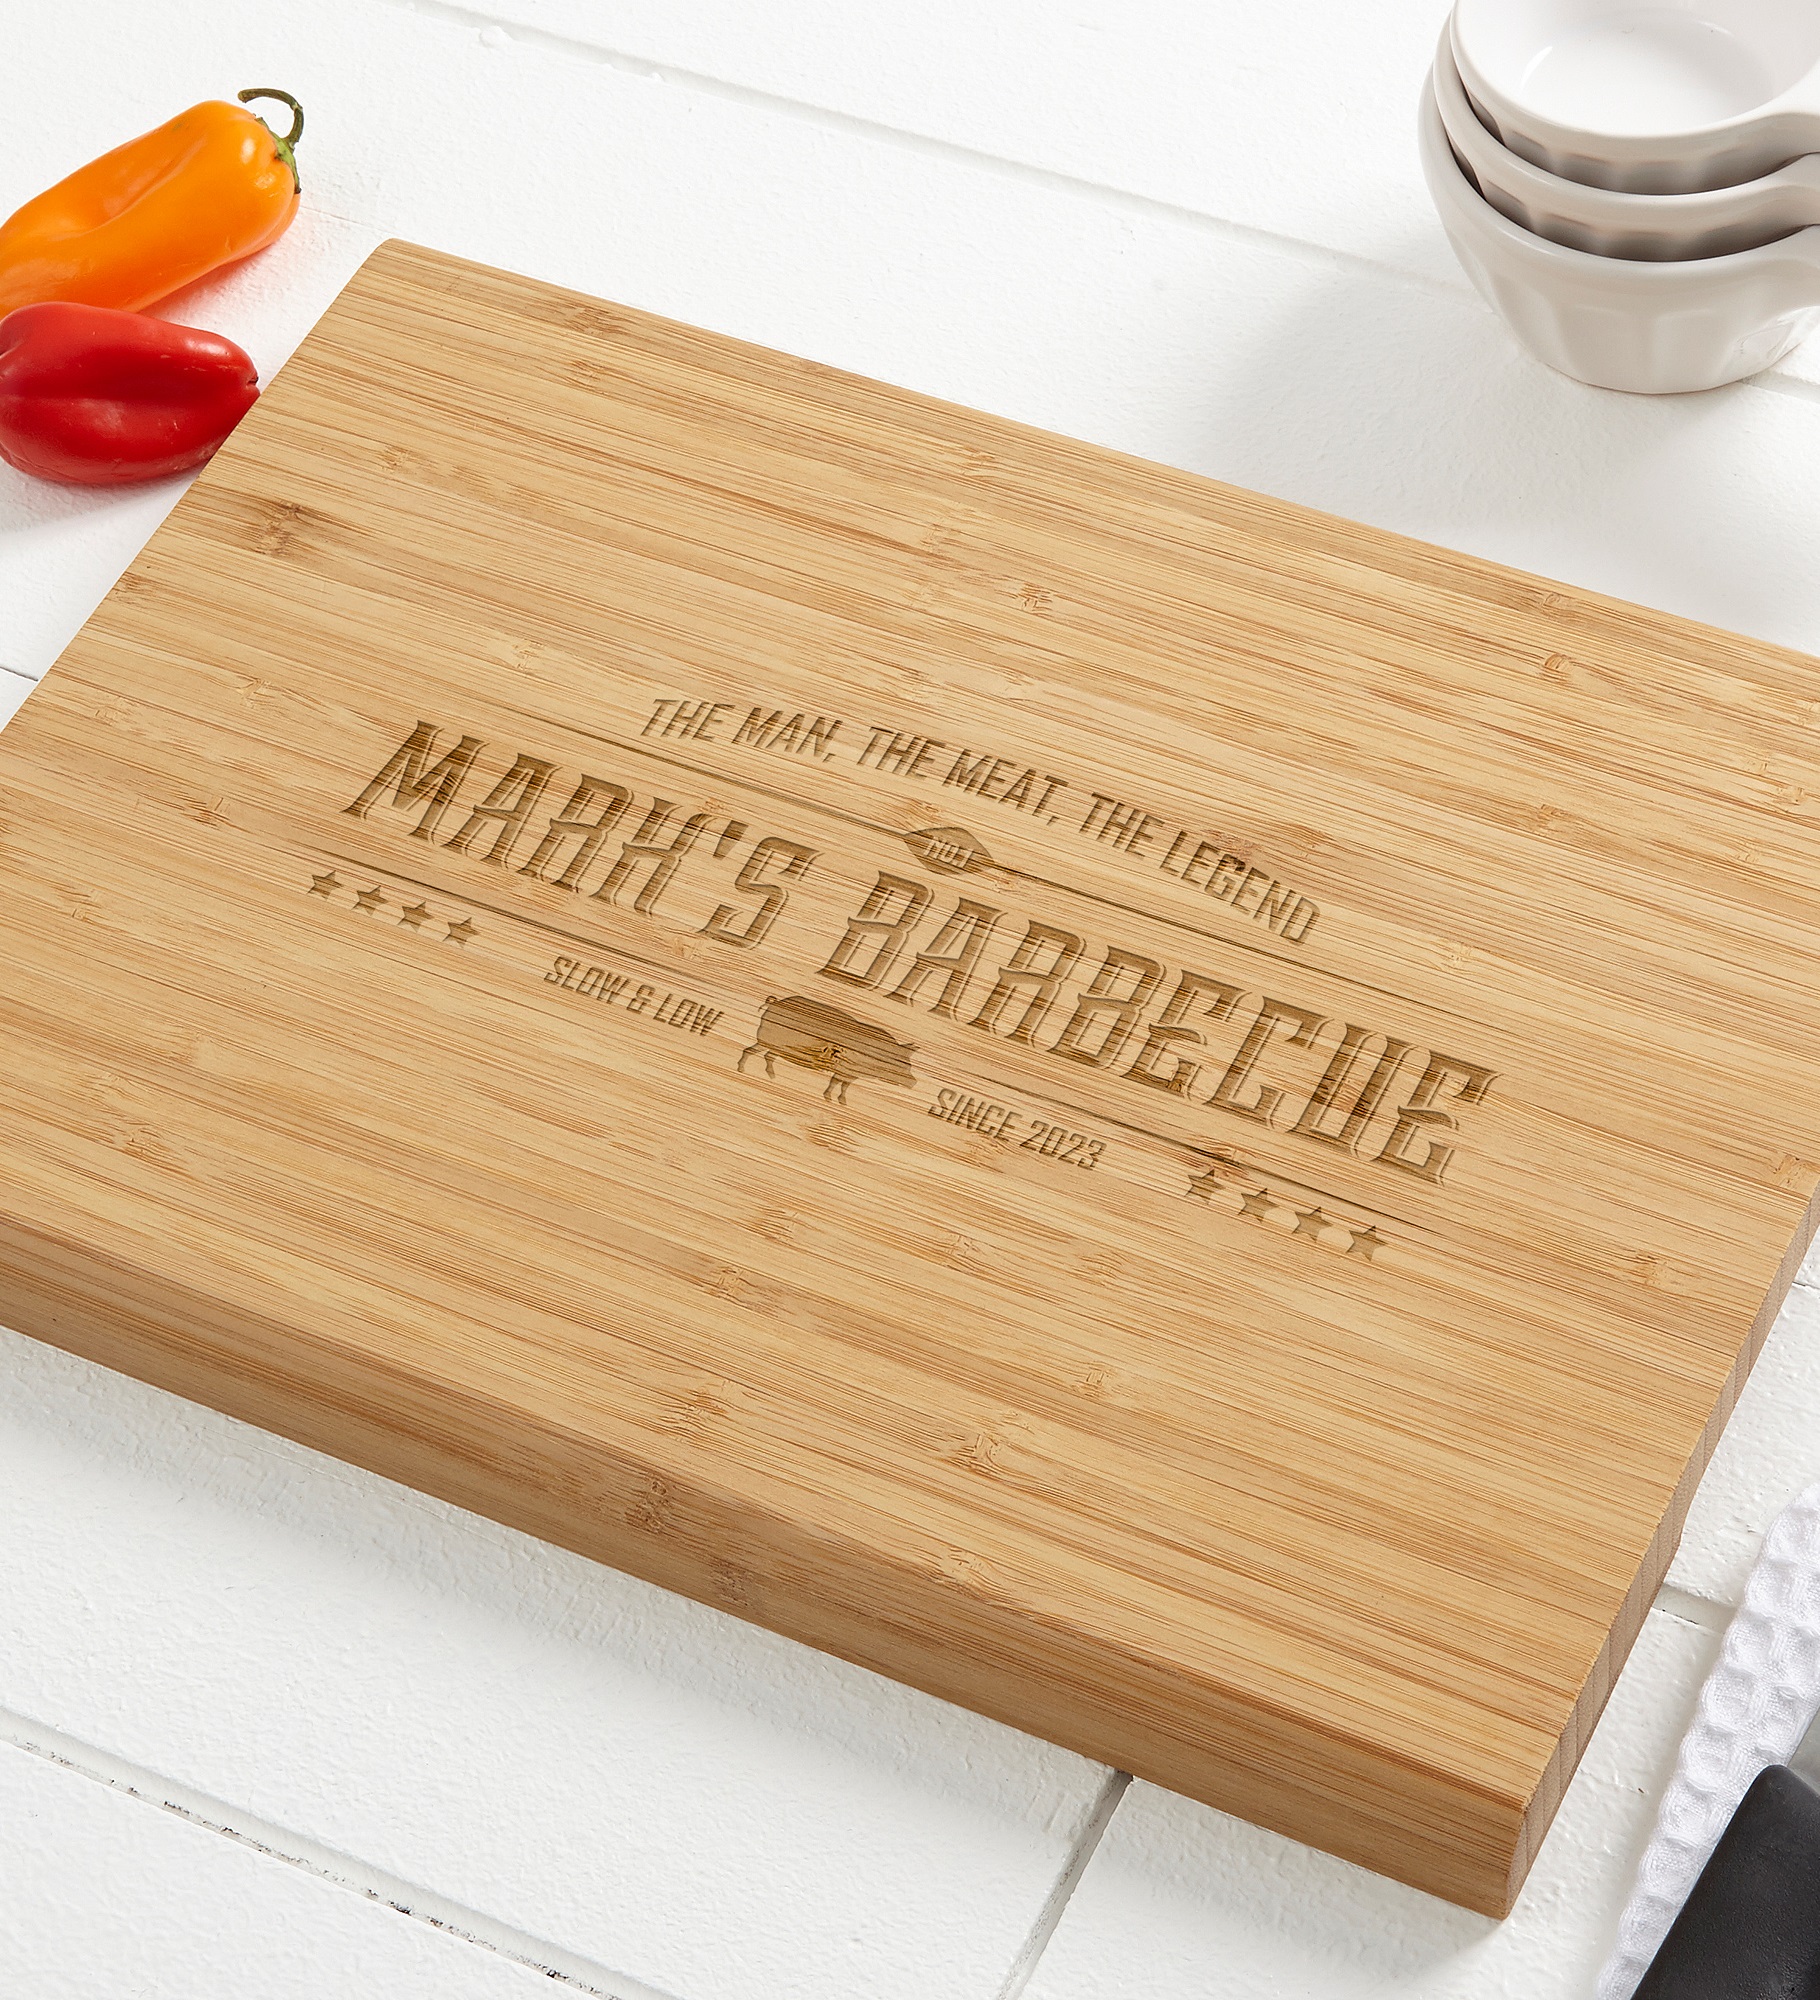 The Man,The Meat,The Legend Personalized Bamboo Cutting Board